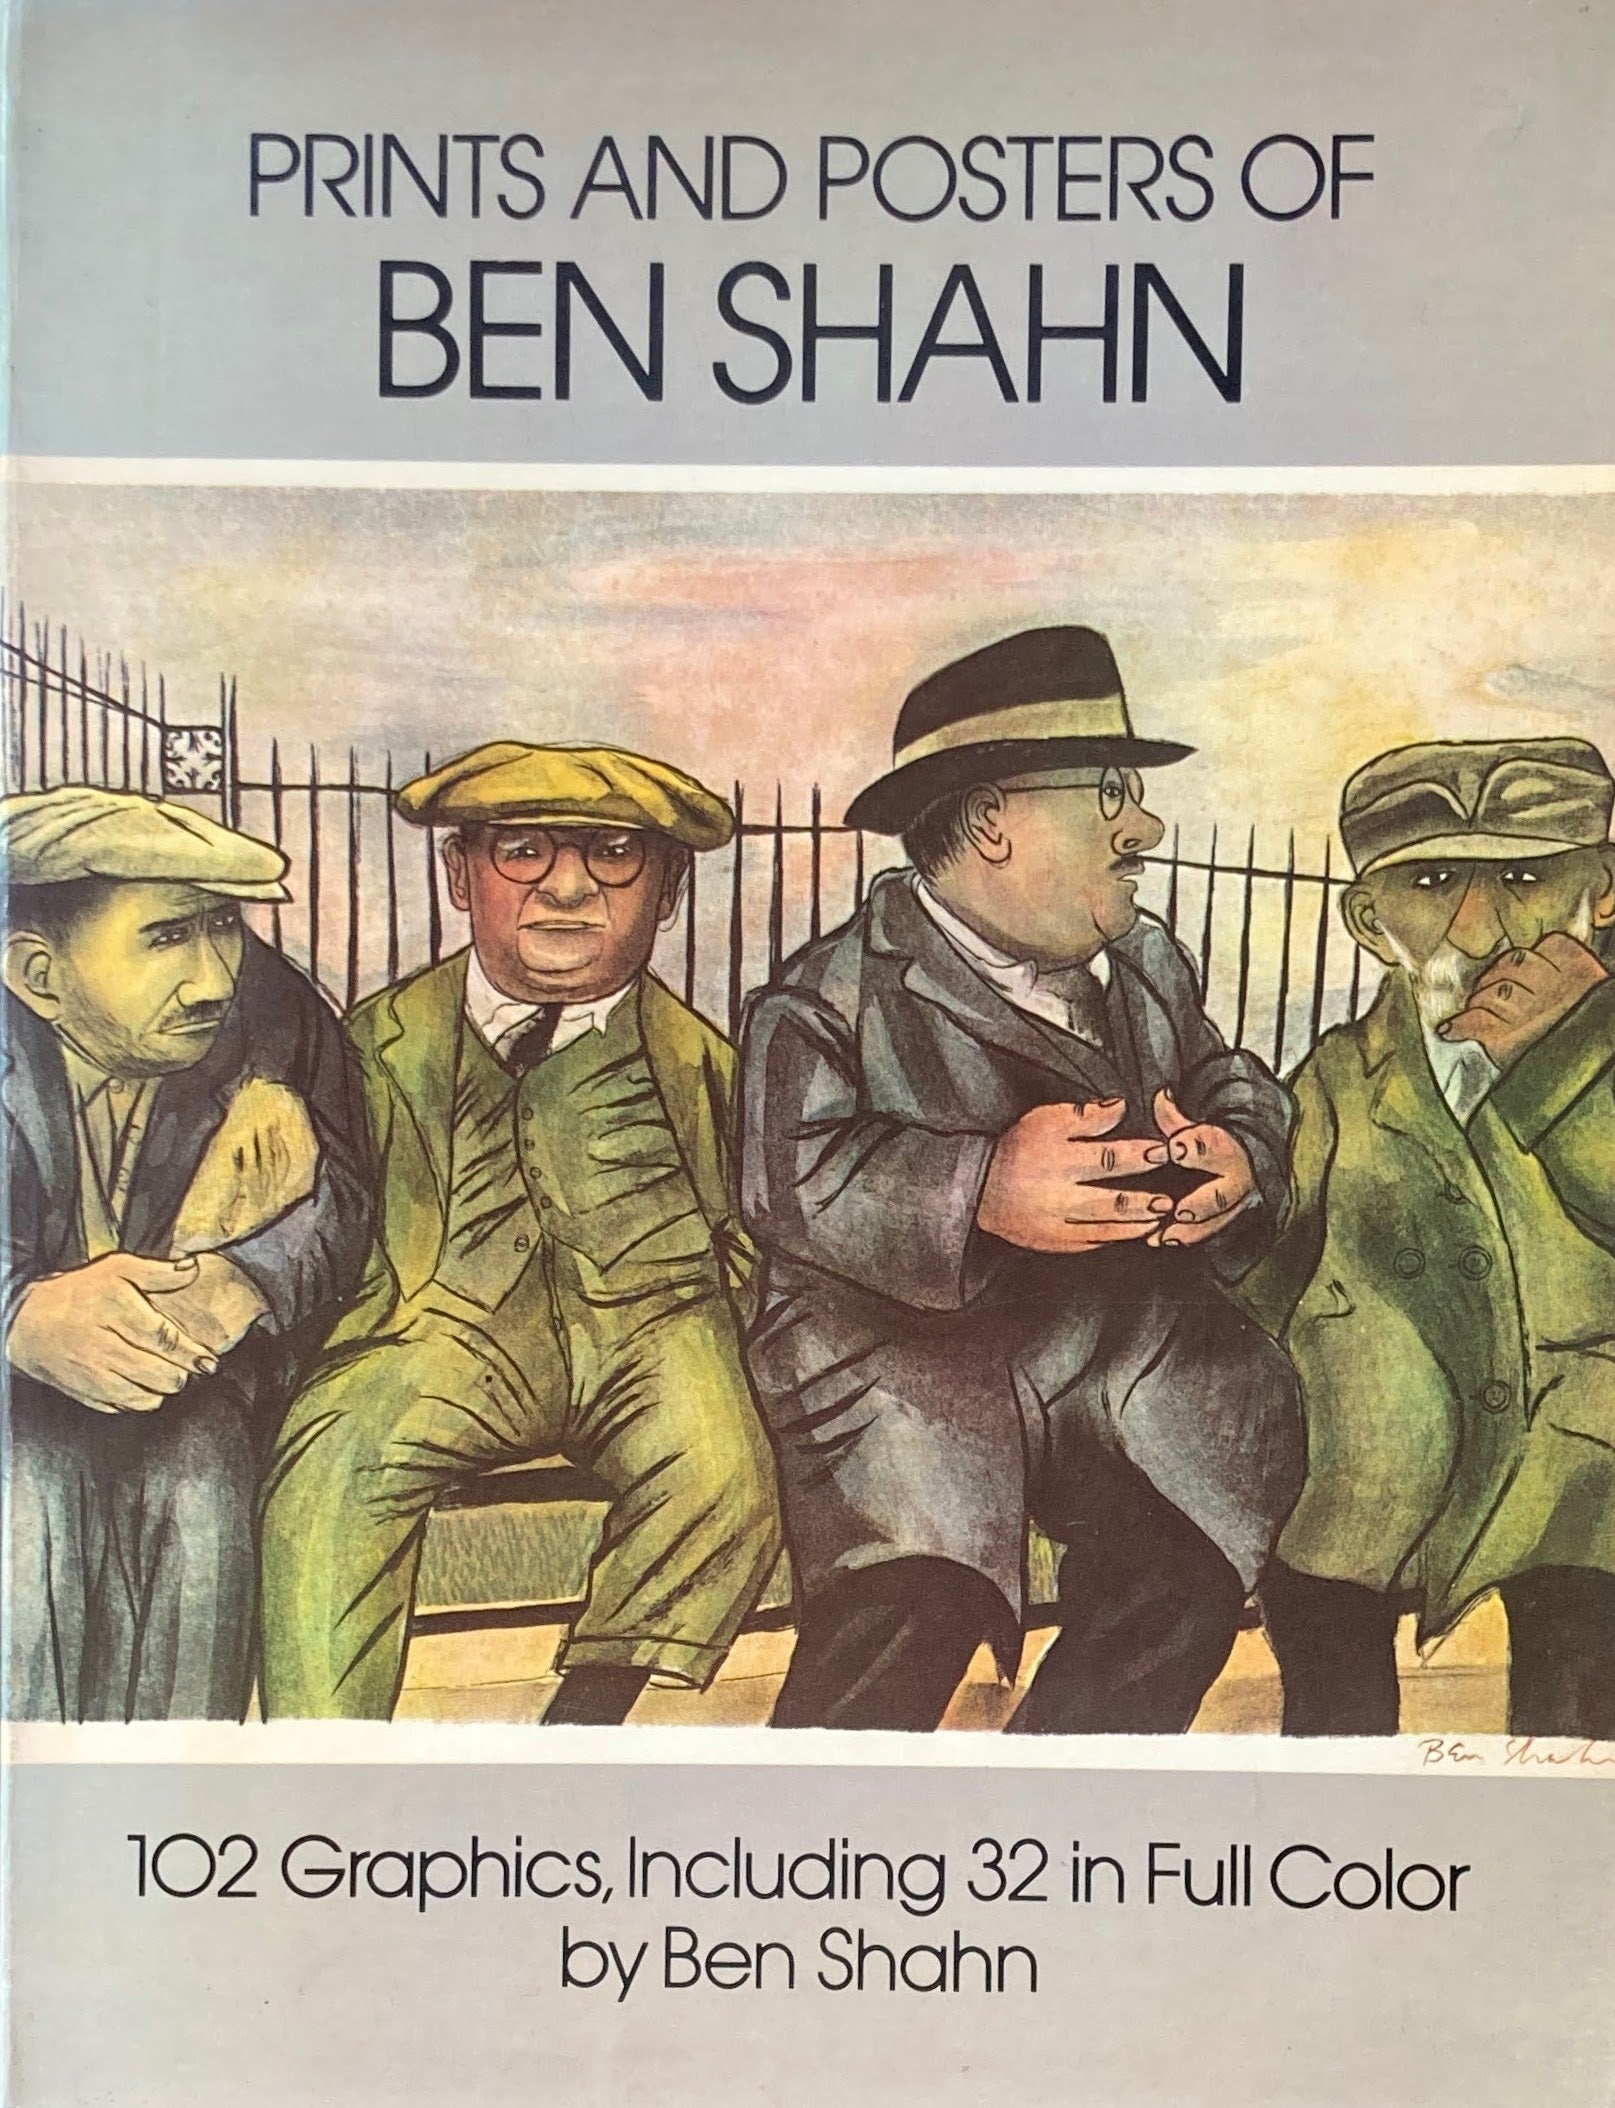 PRINTS AND POSTERS OF BEN SHAHN　ベン・シャーン　Dover